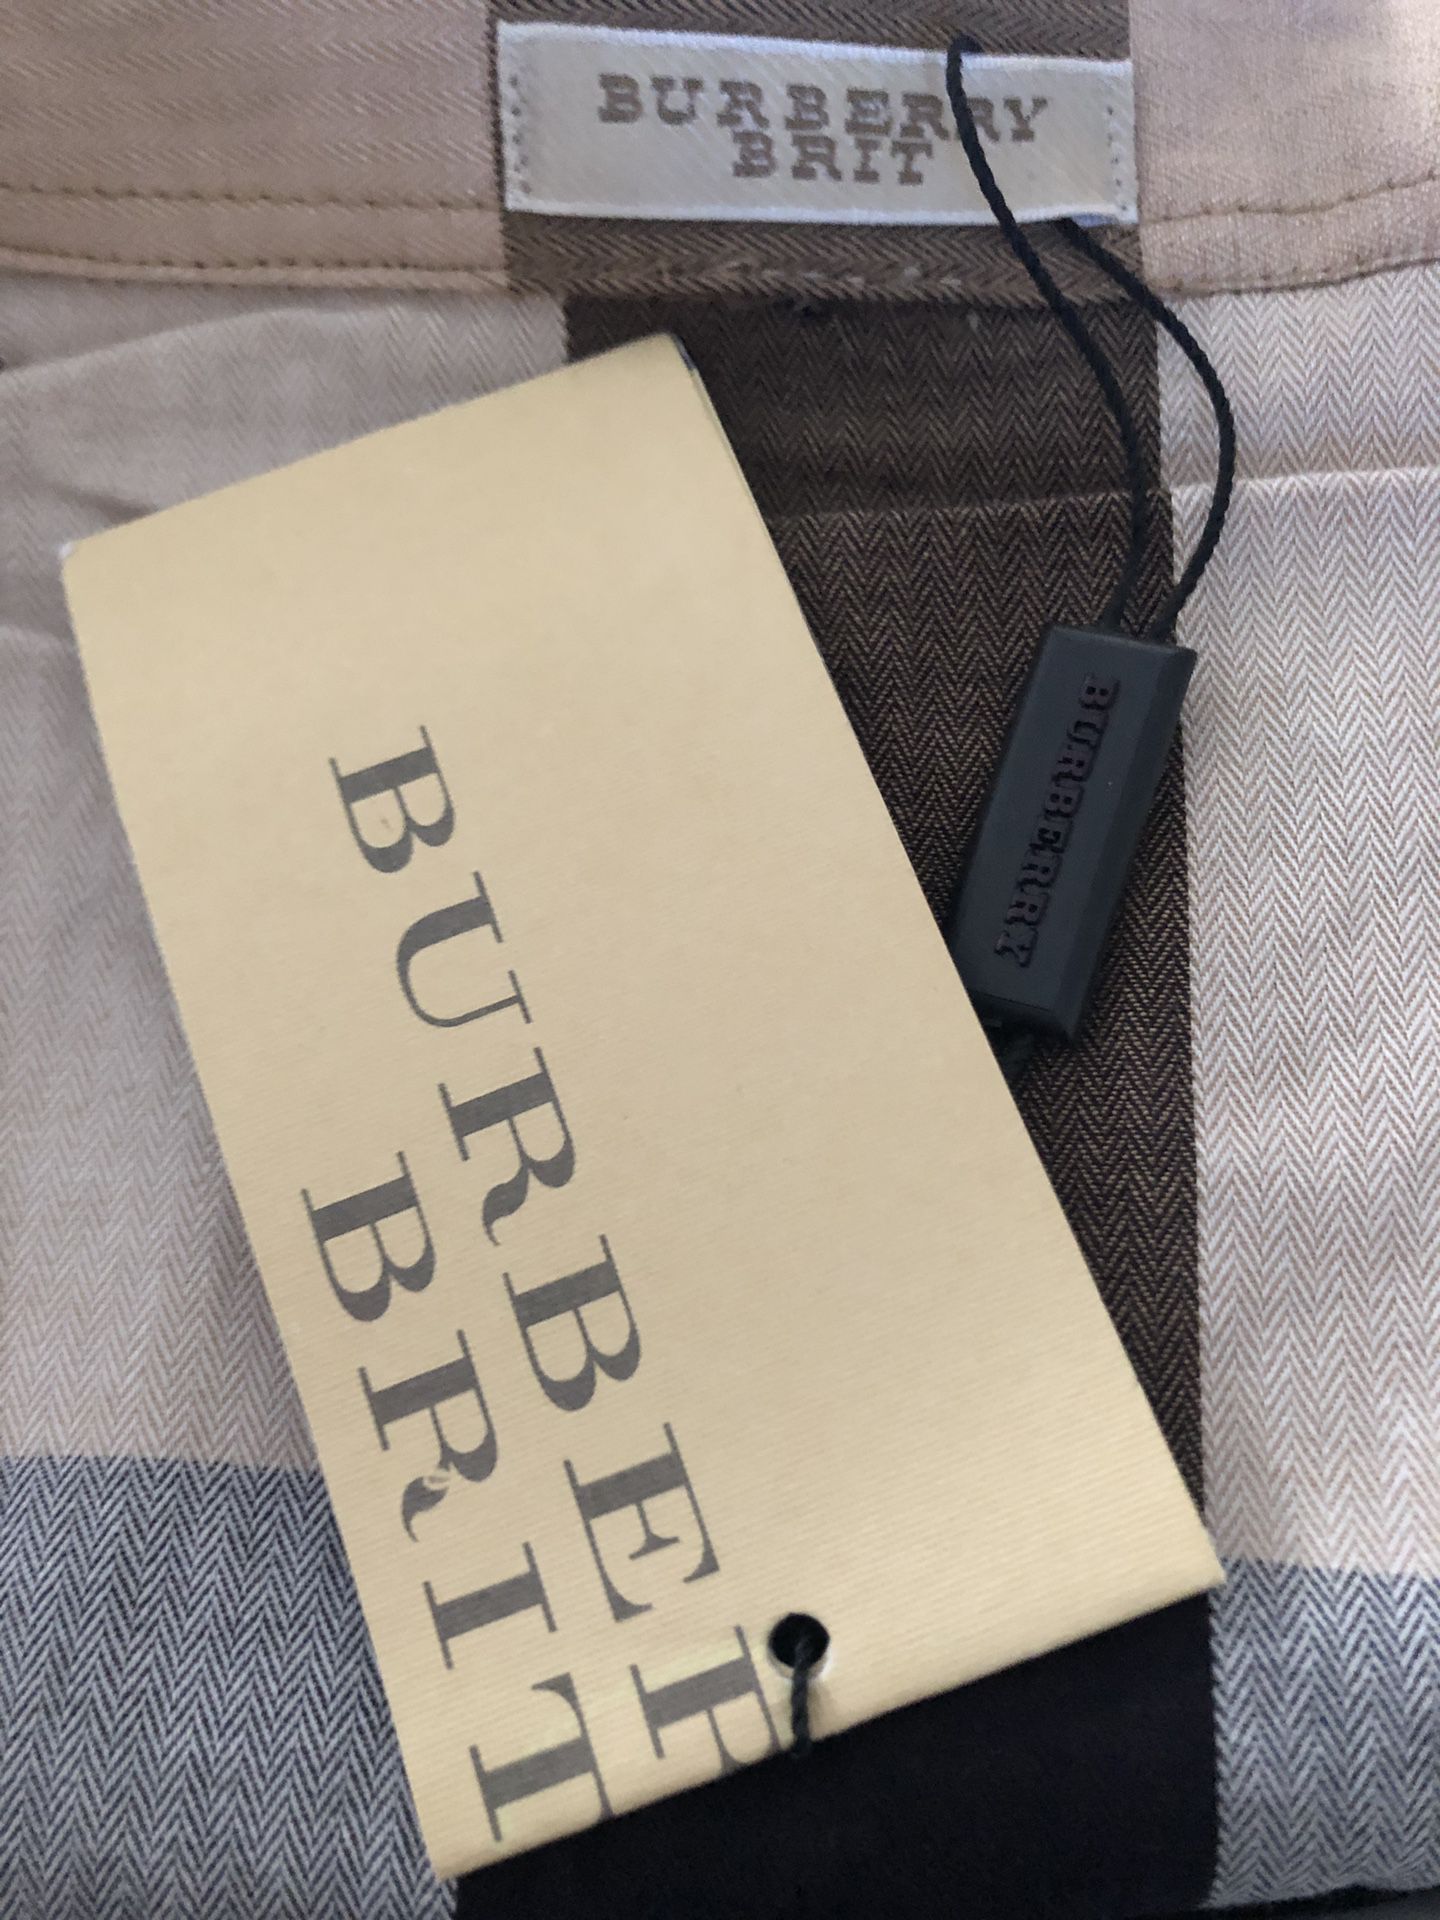 Burberry woman shirt size small